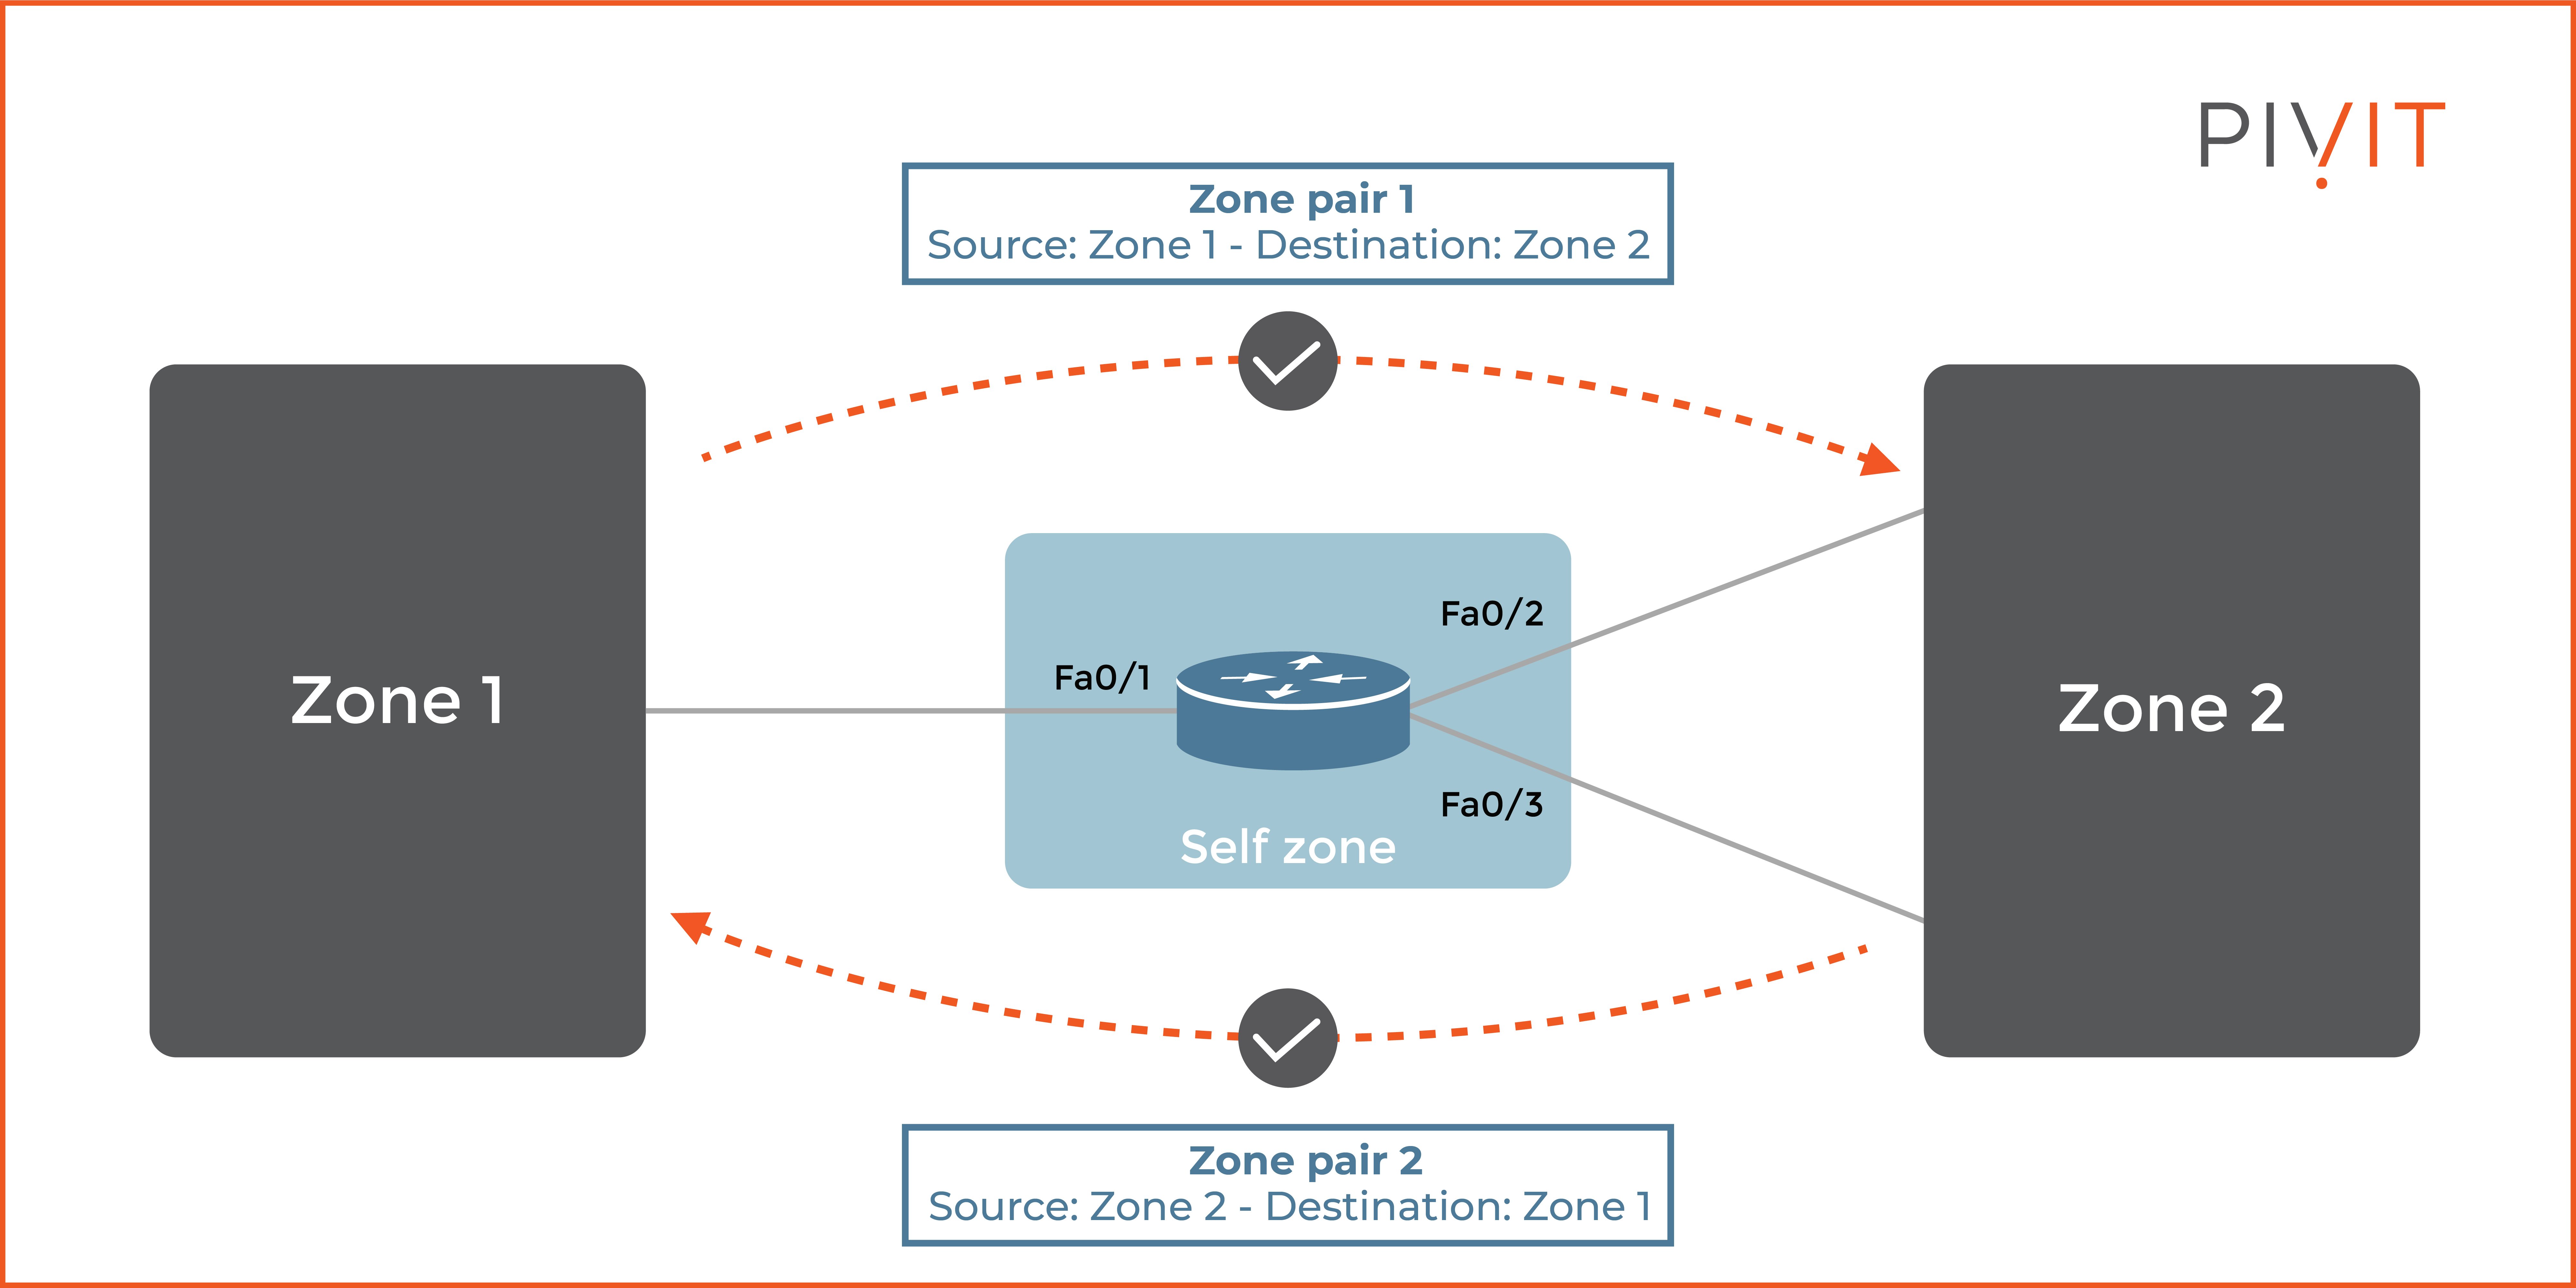 Zone pair 1 allows communication from Zone 1 to Zone 2, while Zone pair 2 allows communication from Zone 2 to Zone 1